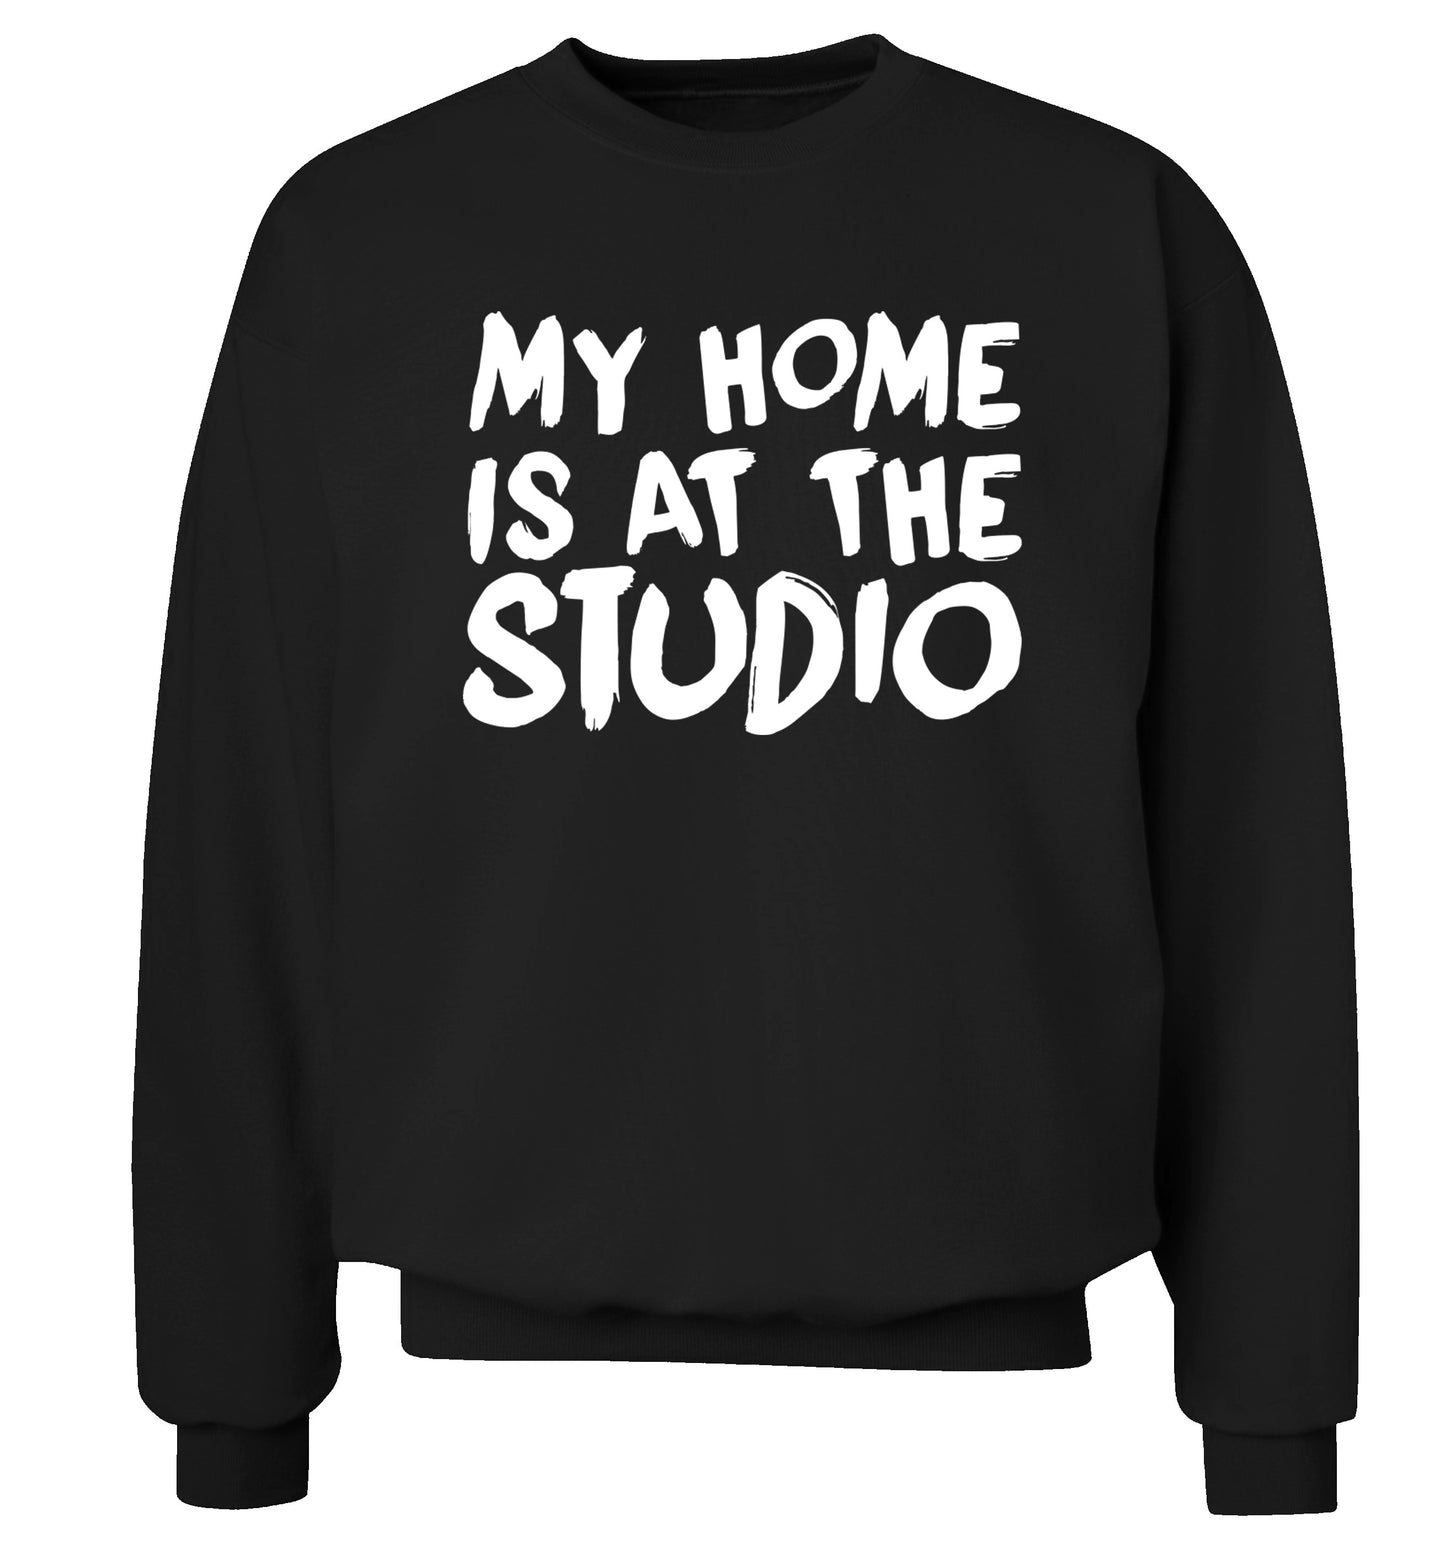 My home is at the studio Adult's unisex black Sweater 2XL